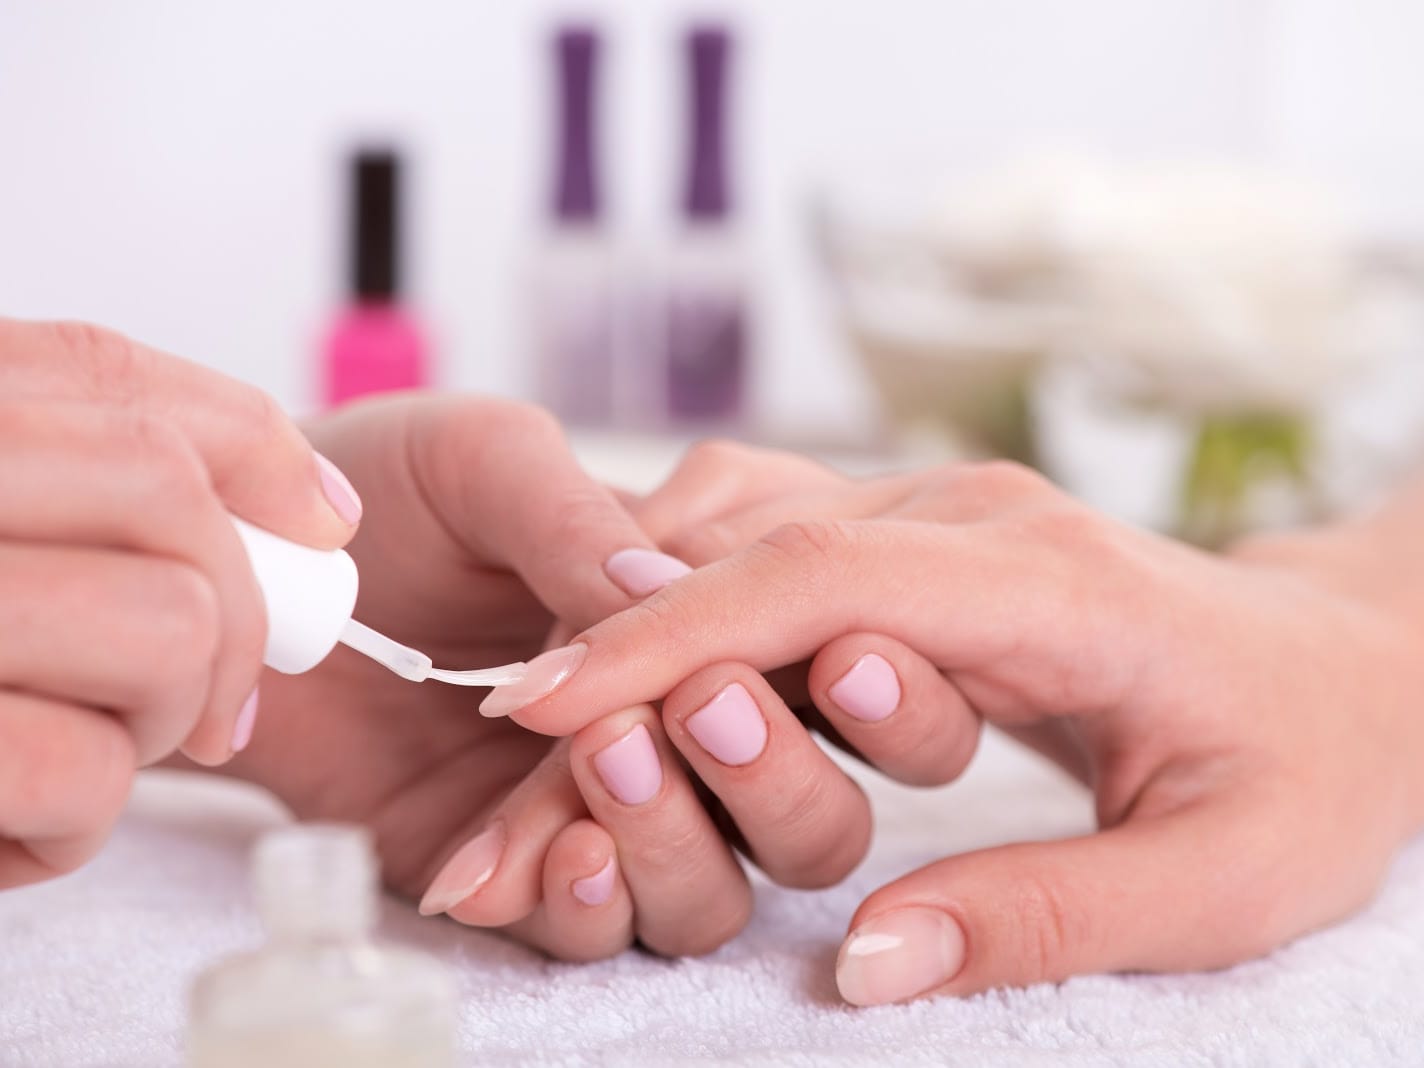 Classic Mani - Pedi with Nail Art (1 Session) at Specialist Nail & Beauty Spa - Get Deals, Cashback and Rewards with ShopBack GO